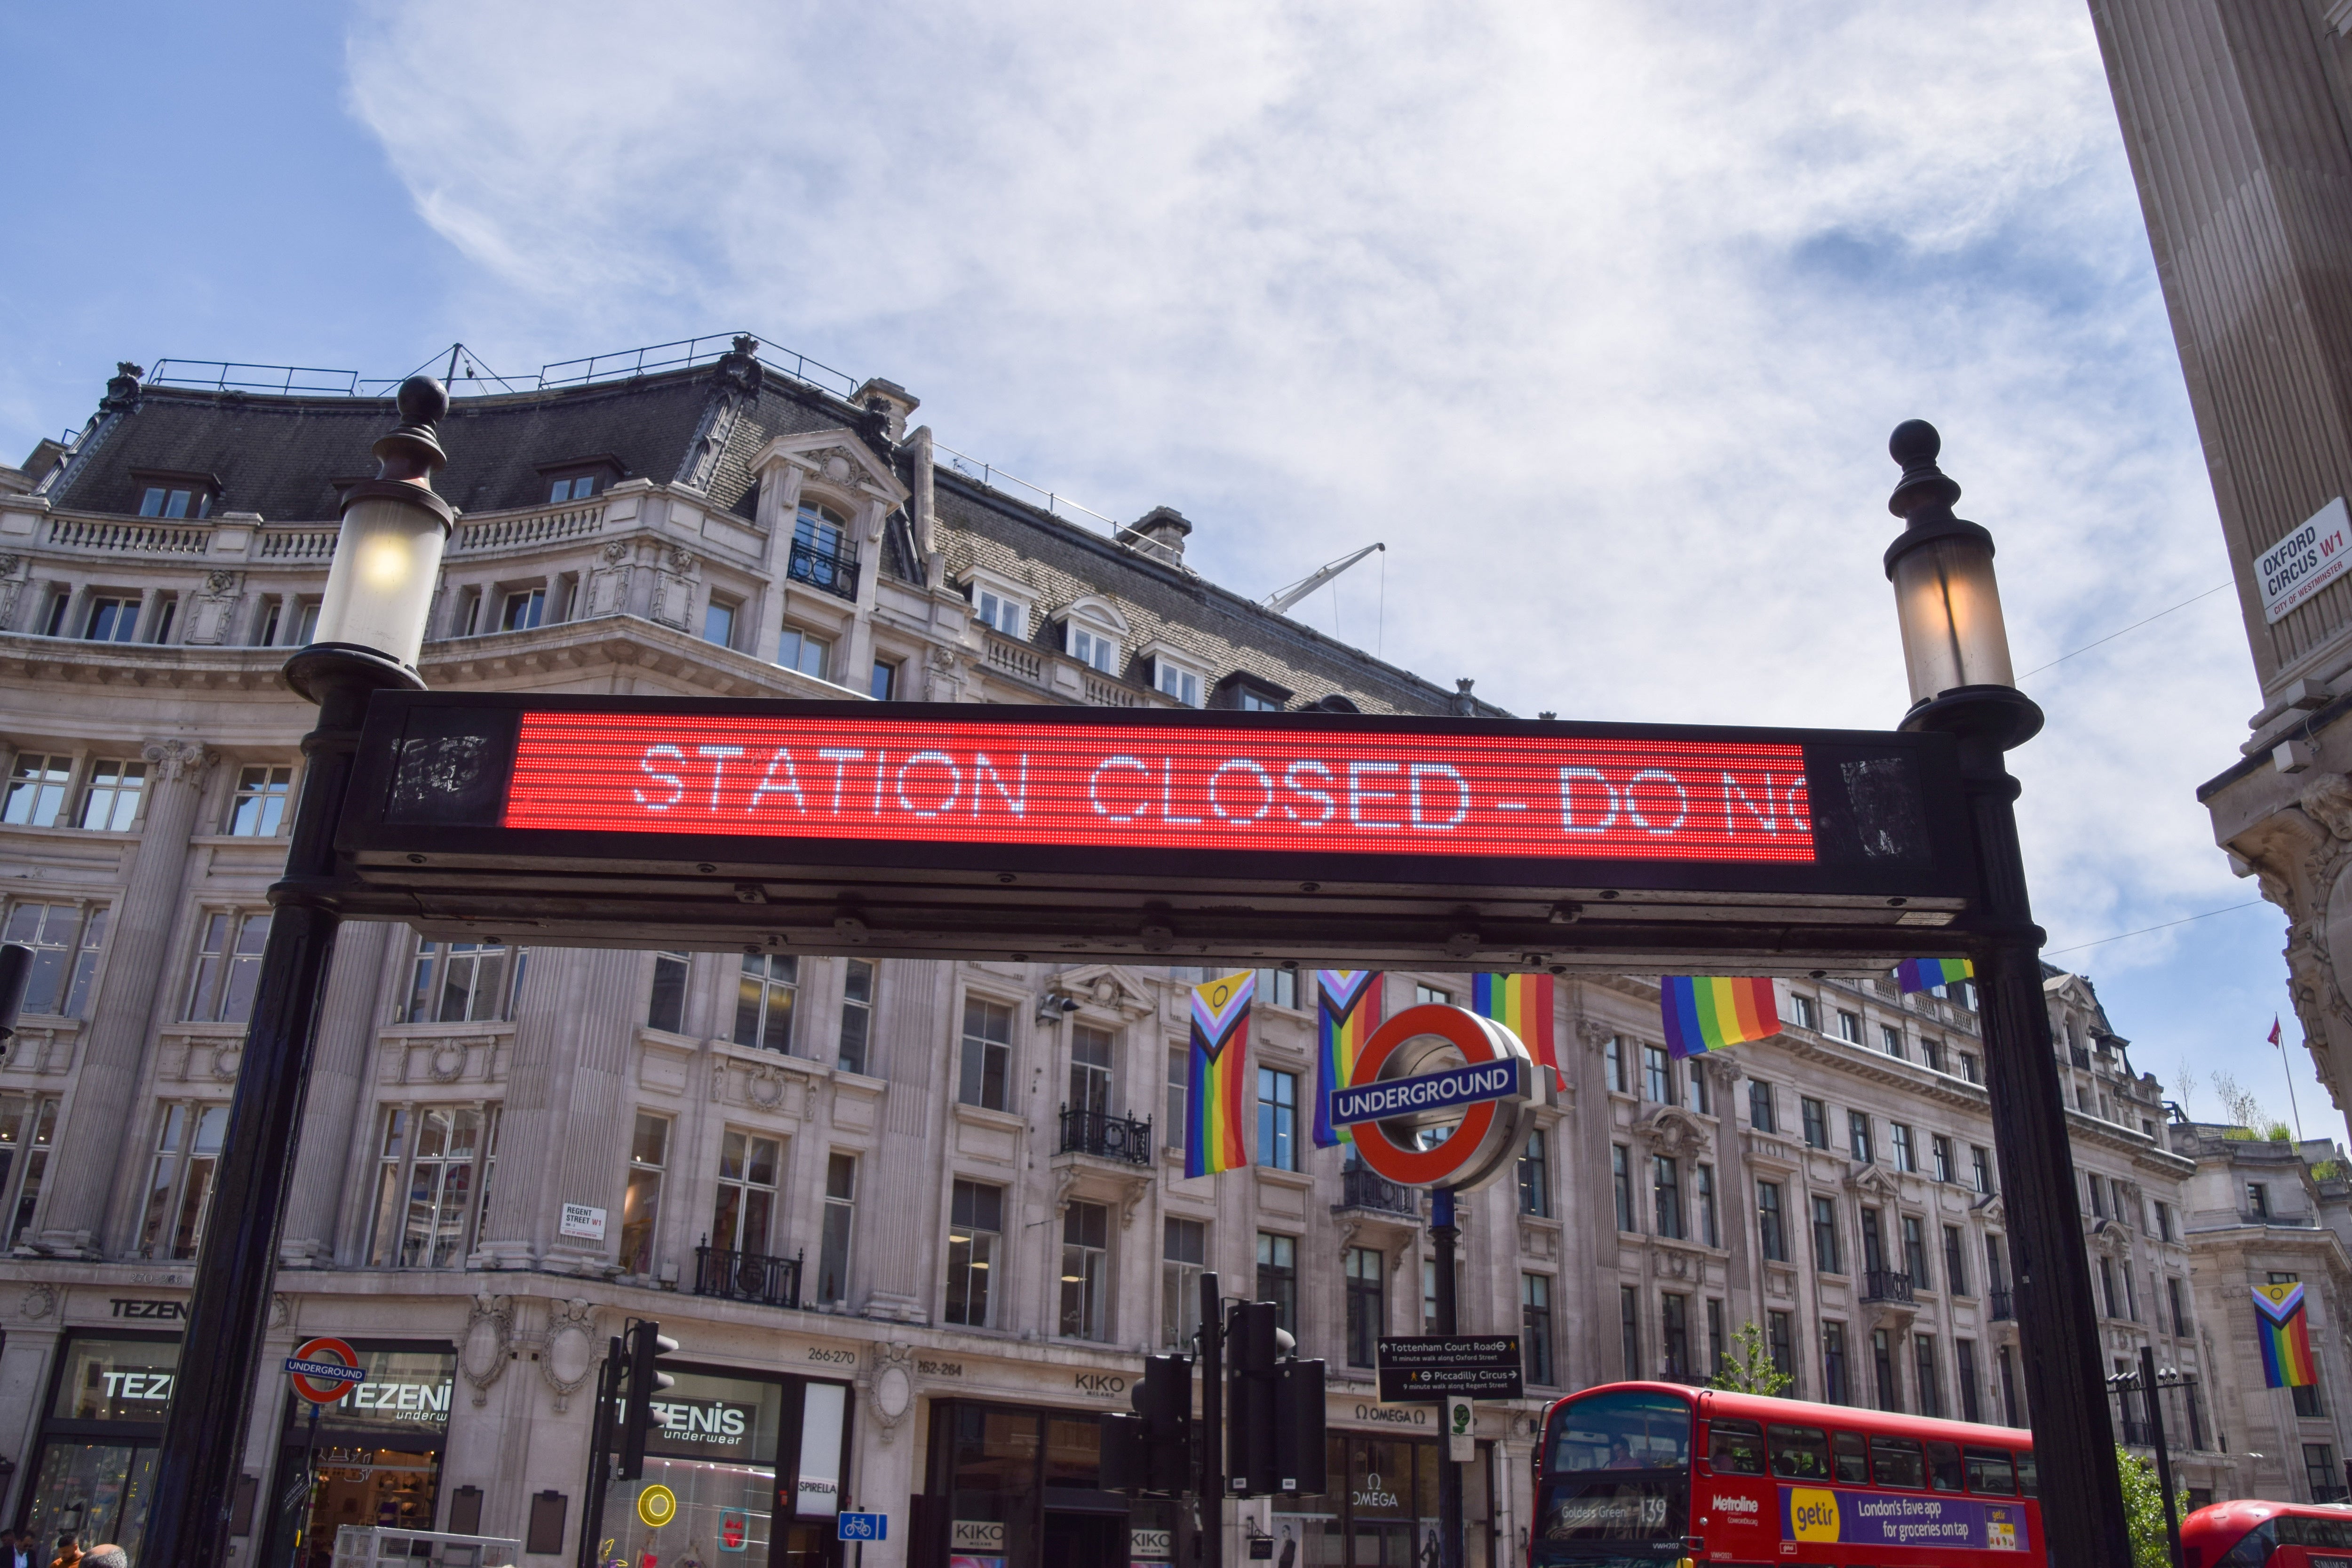 Oxford Circus station evacuated after reports of smoke from escalator